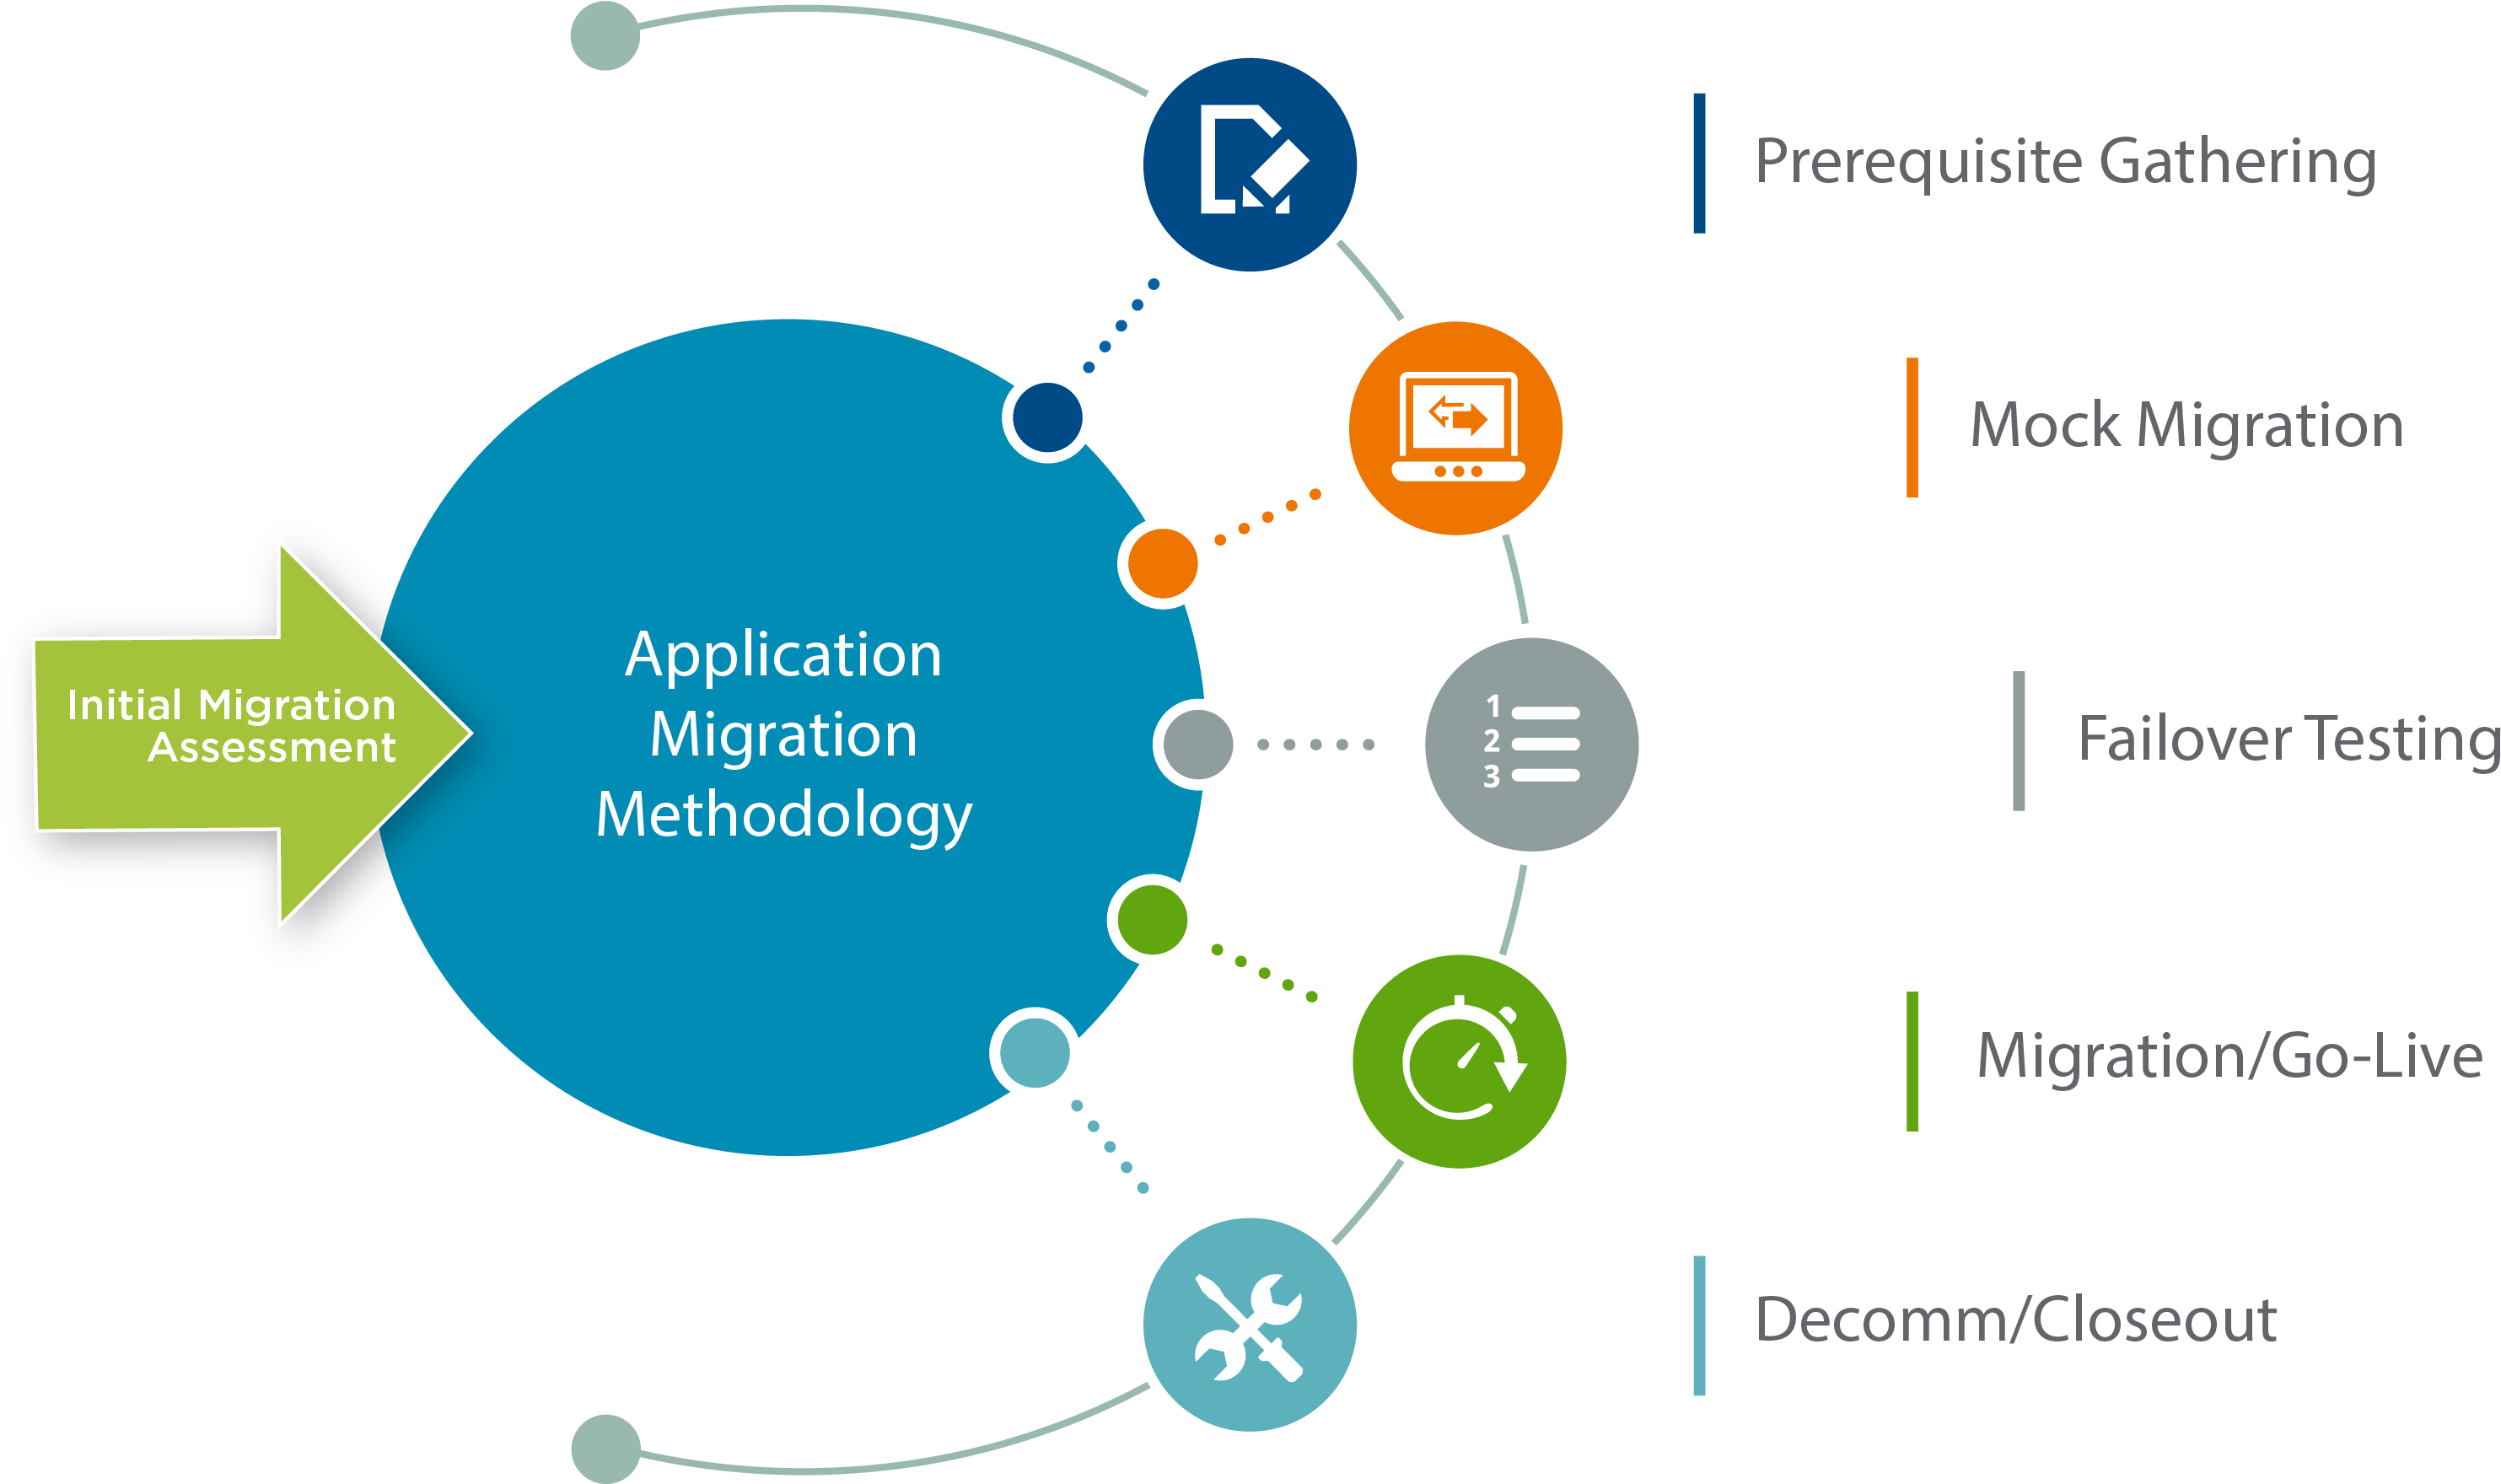 View Larger Image - Application Migration Strategy (2985x1759)